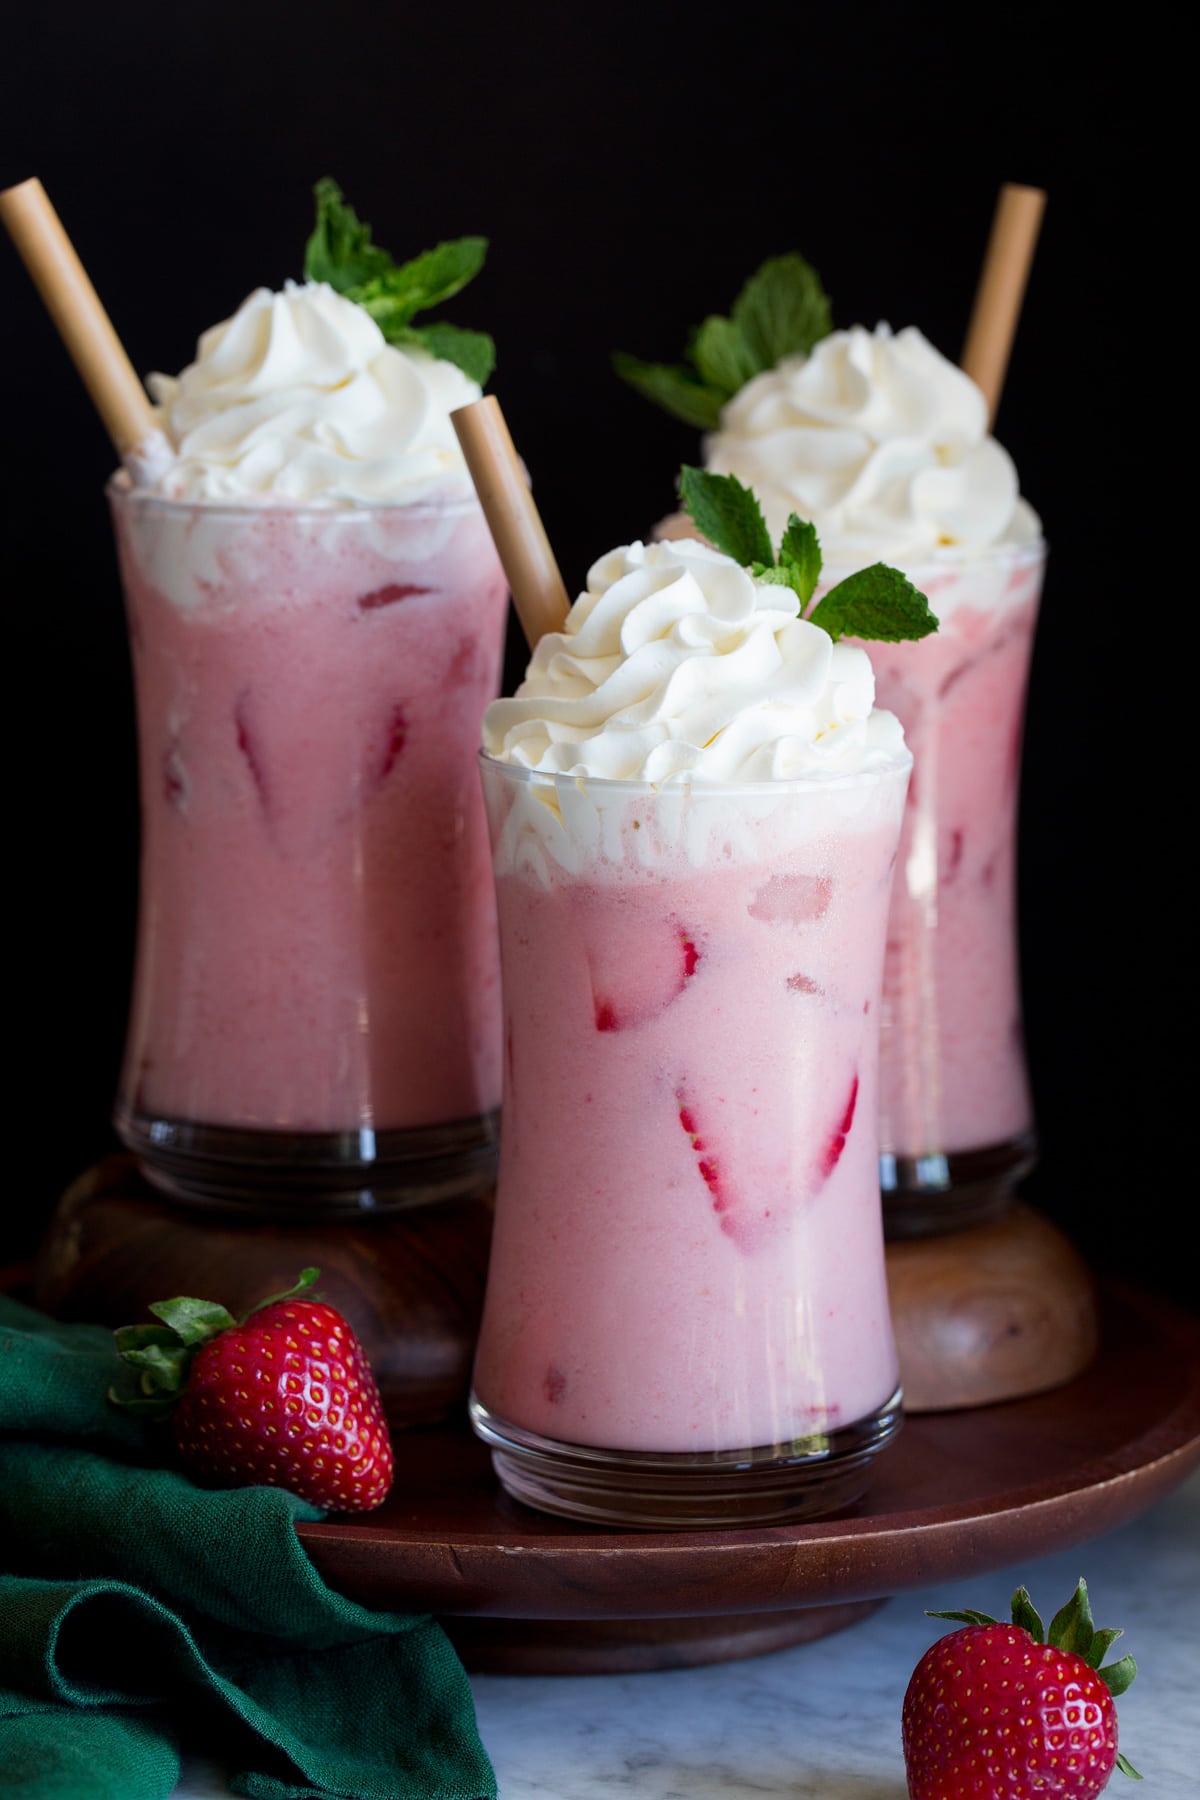 Copycat Starbucks Pink Drink recipe. Shows three servings topped with whipped cream.